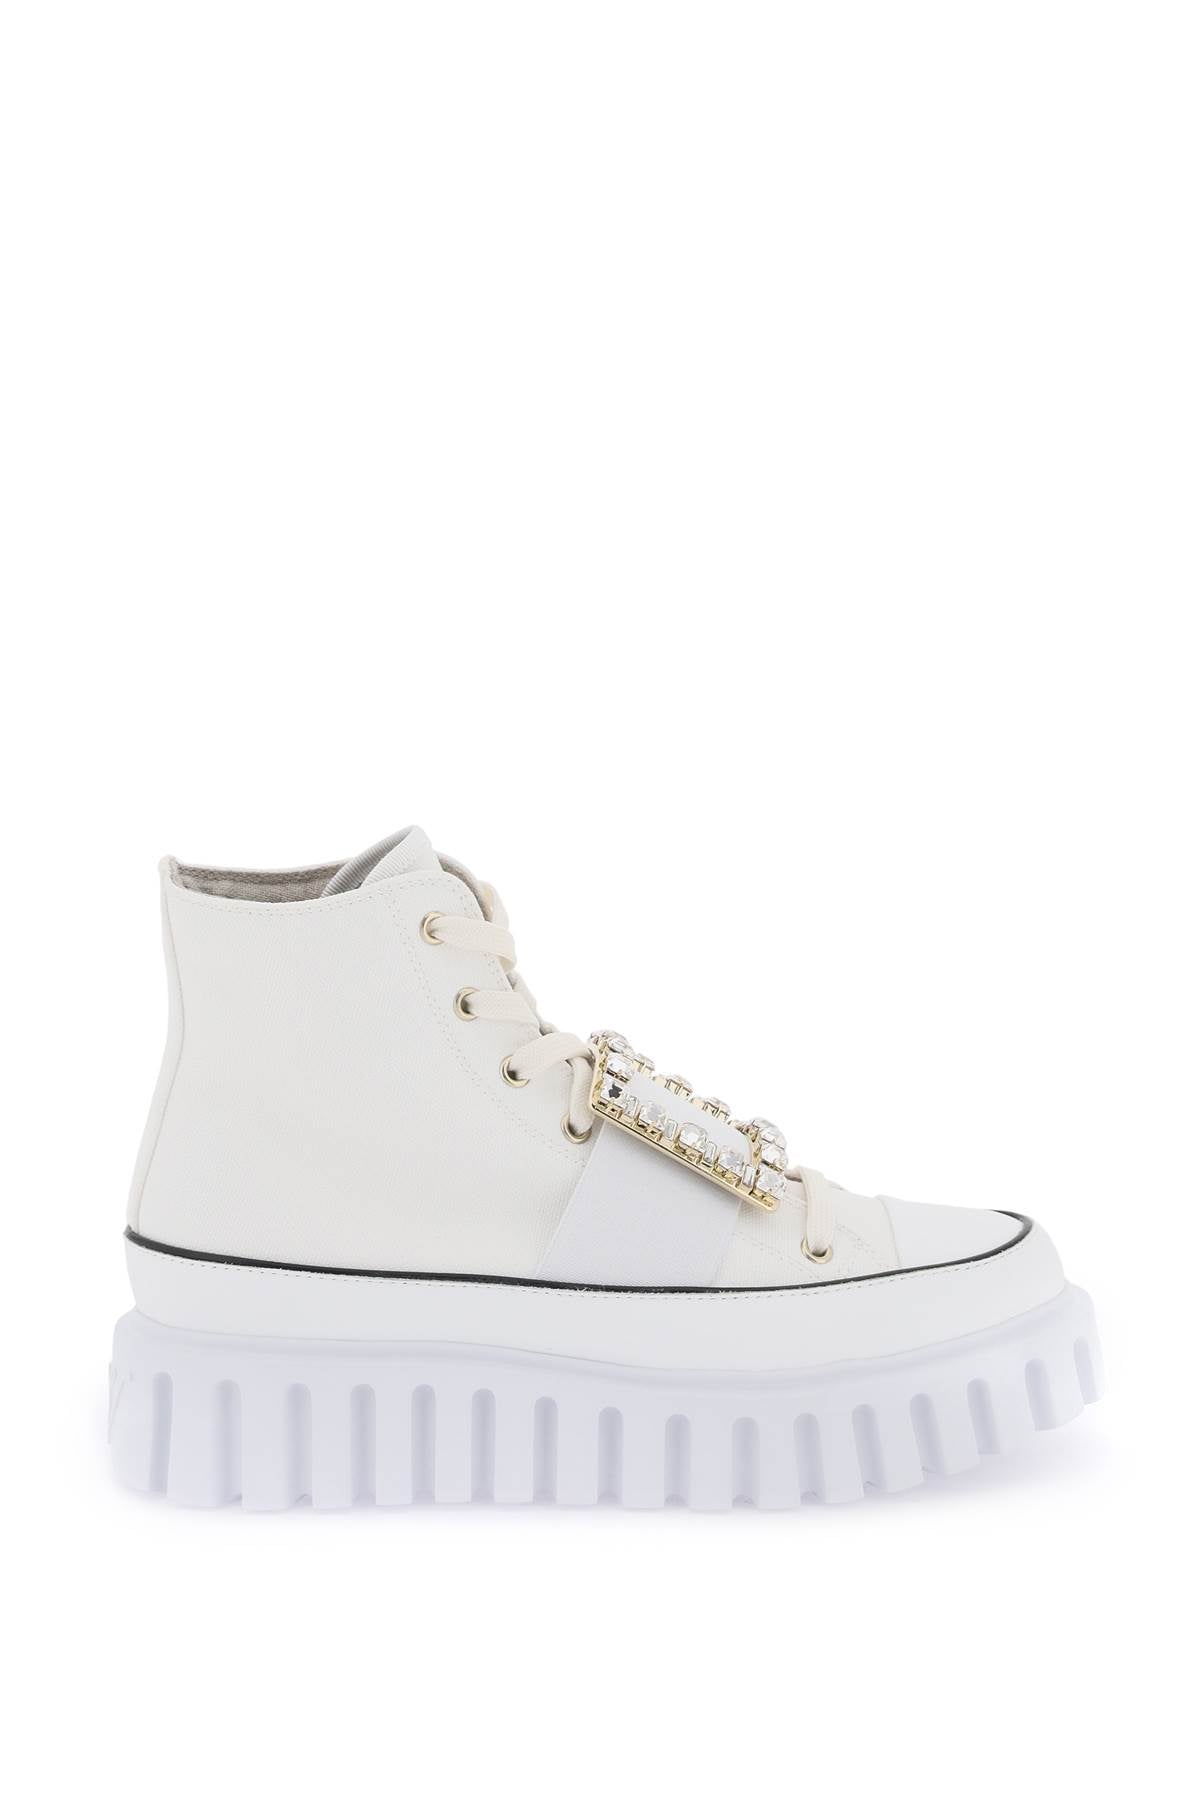 Roger vivier viv' go-thick canvas high-top sneakers with buckle RVW64635860Q4U WHITE